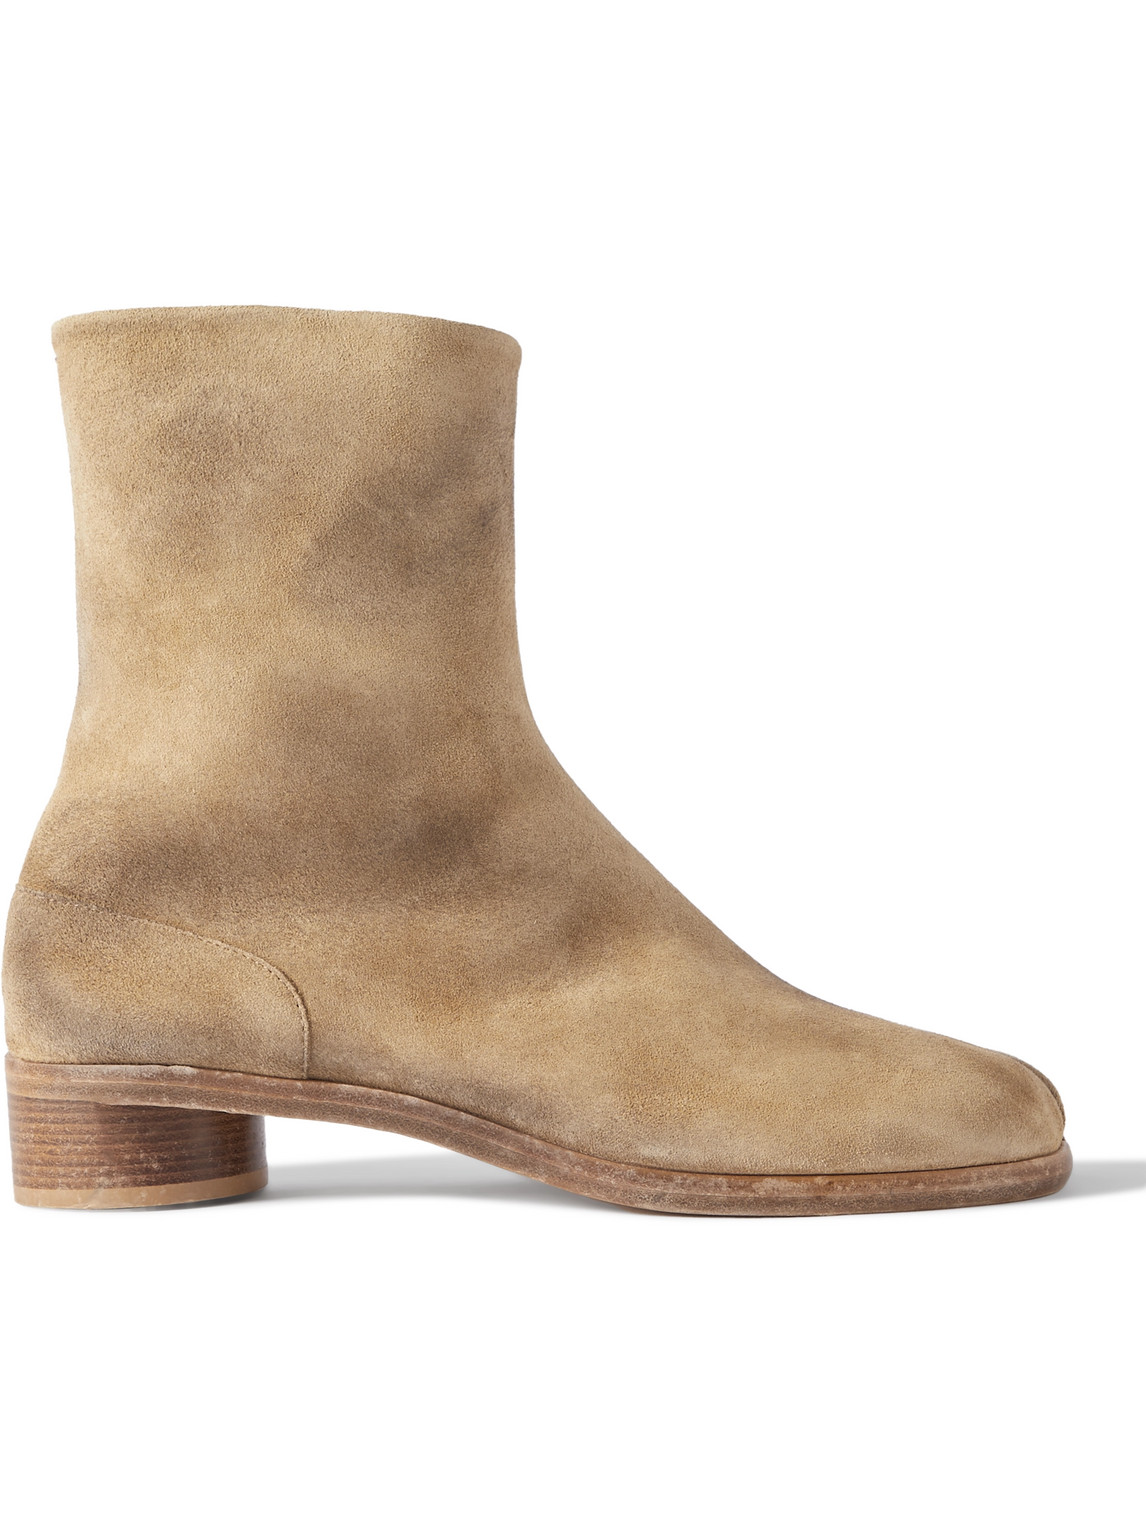 Maison Margiela Tabi Suede Ankle Boots In Brown